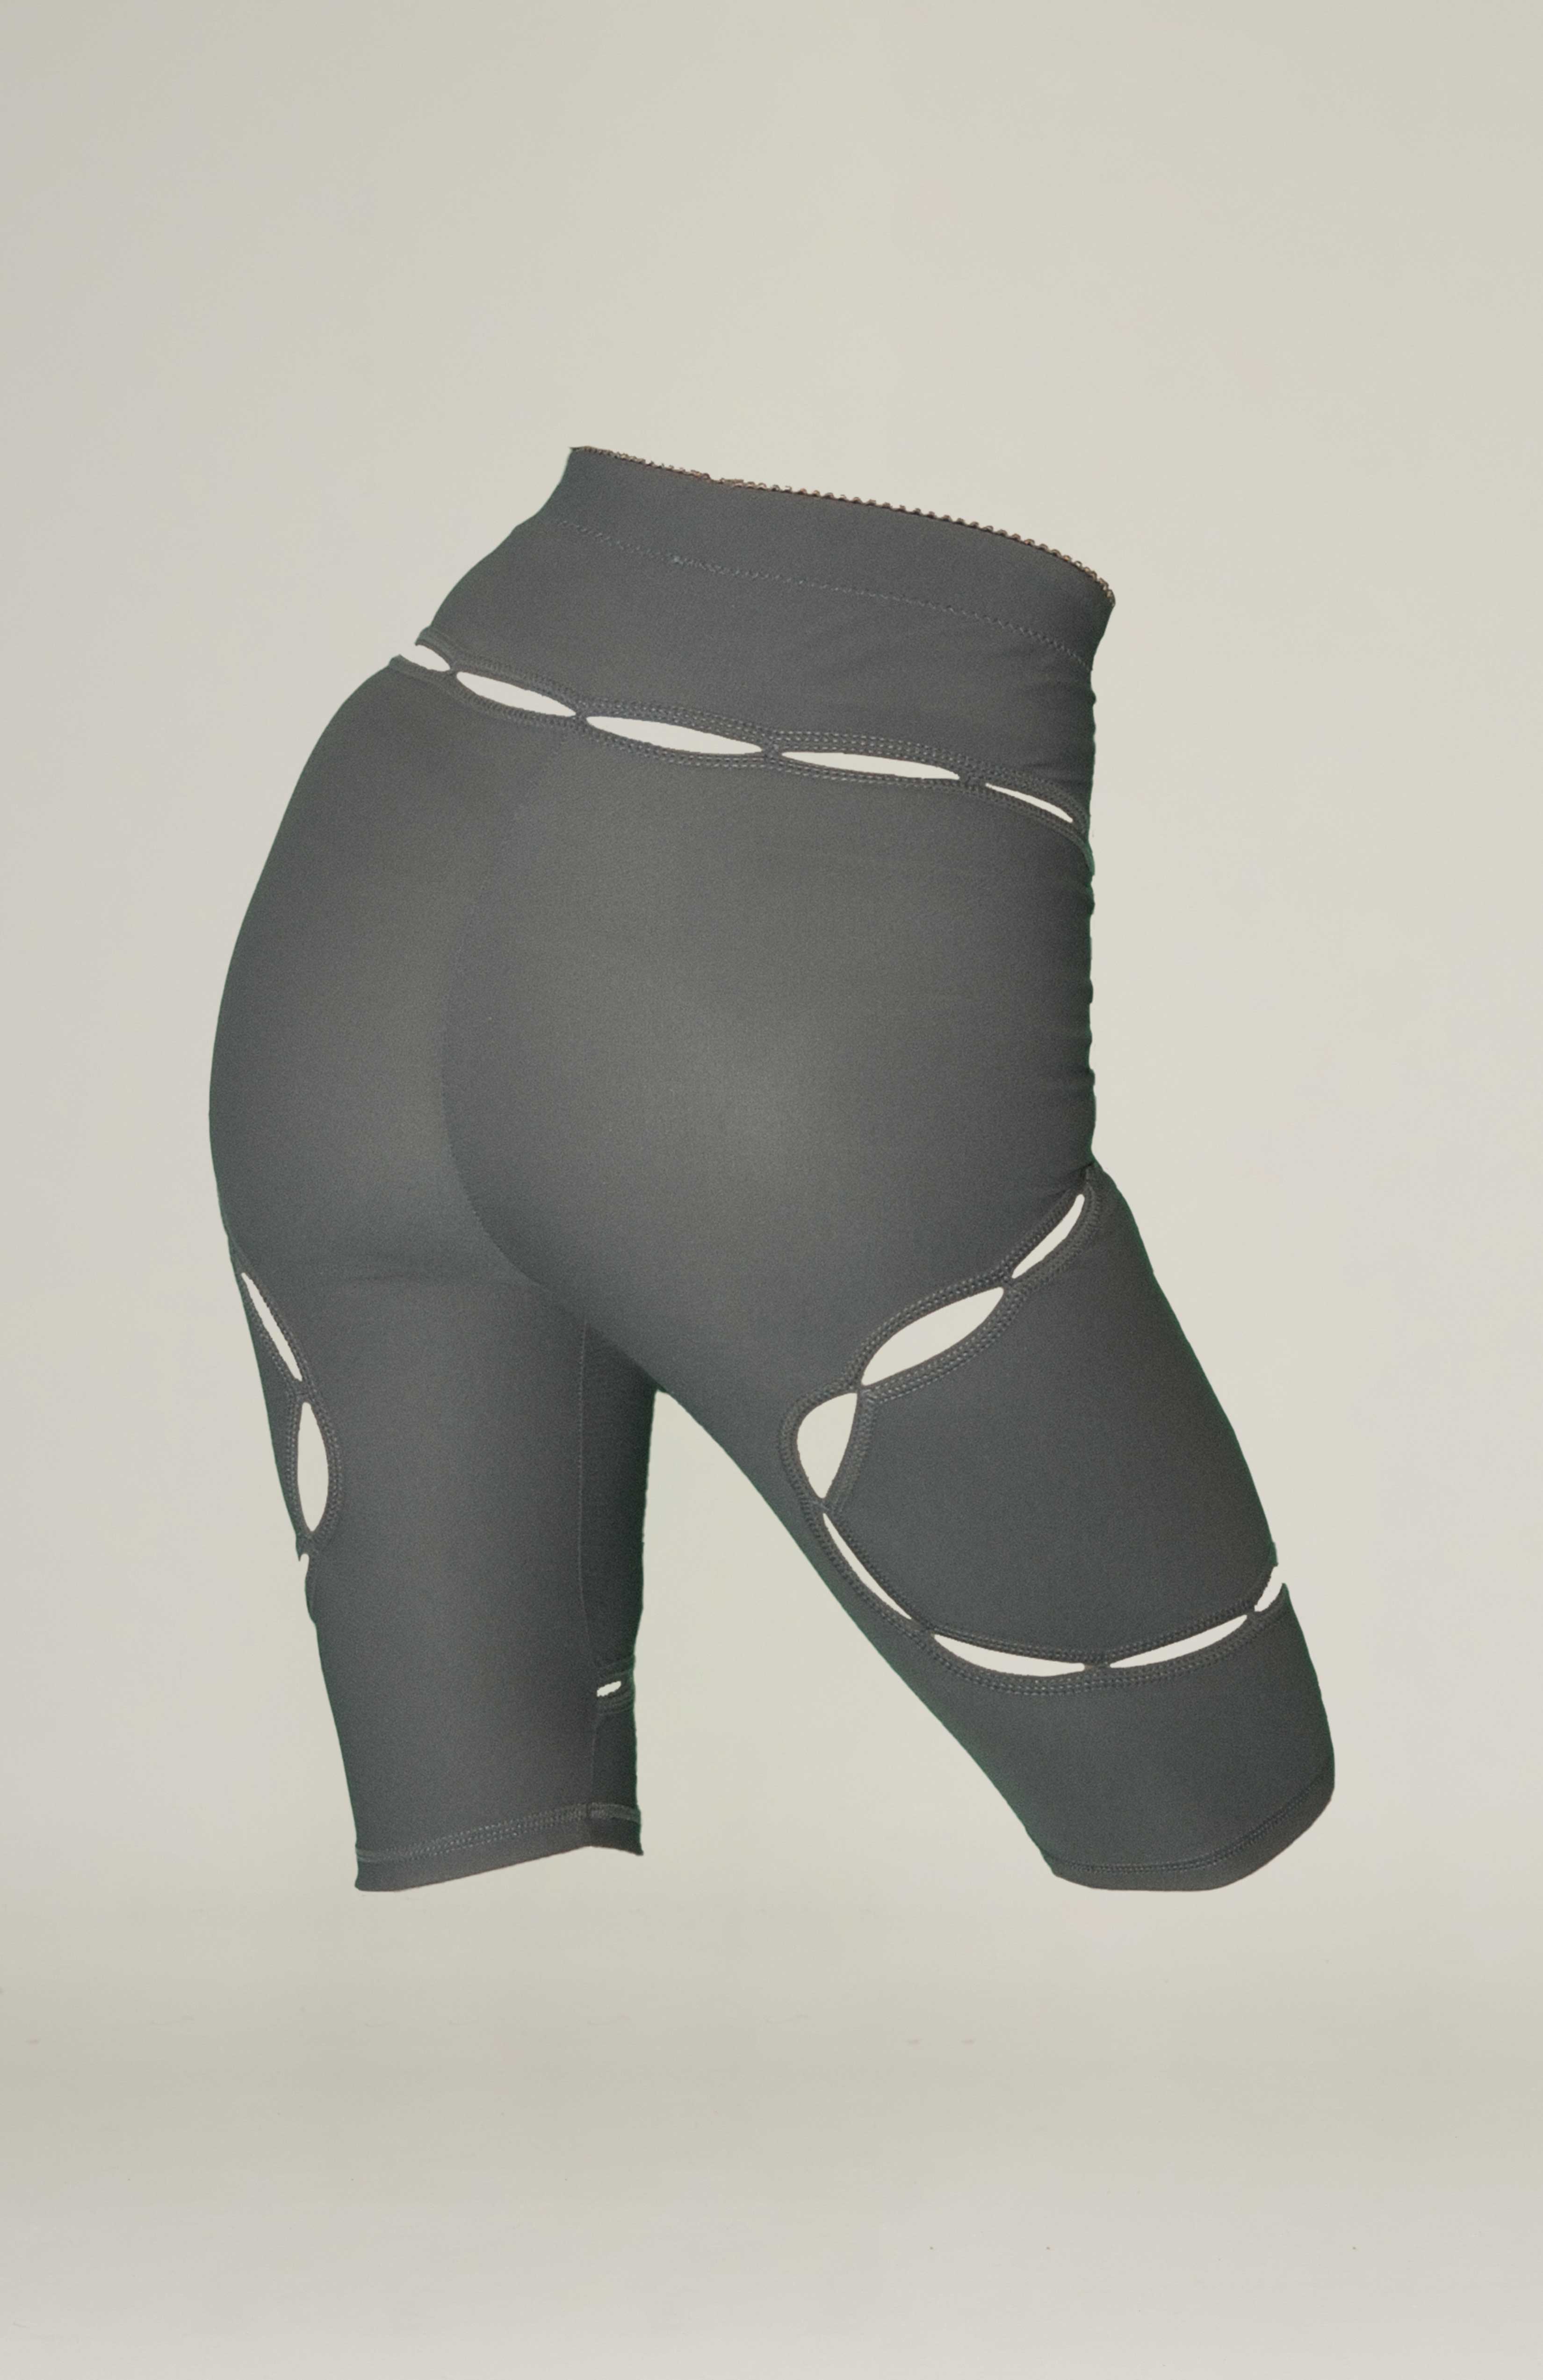 Slate high waisted bike shorts with complimentary curved Key-hole design lines that wraps around the leg and thigh. Features, Branded Maroske Peech soft elasticated waistband with scalloped hem.